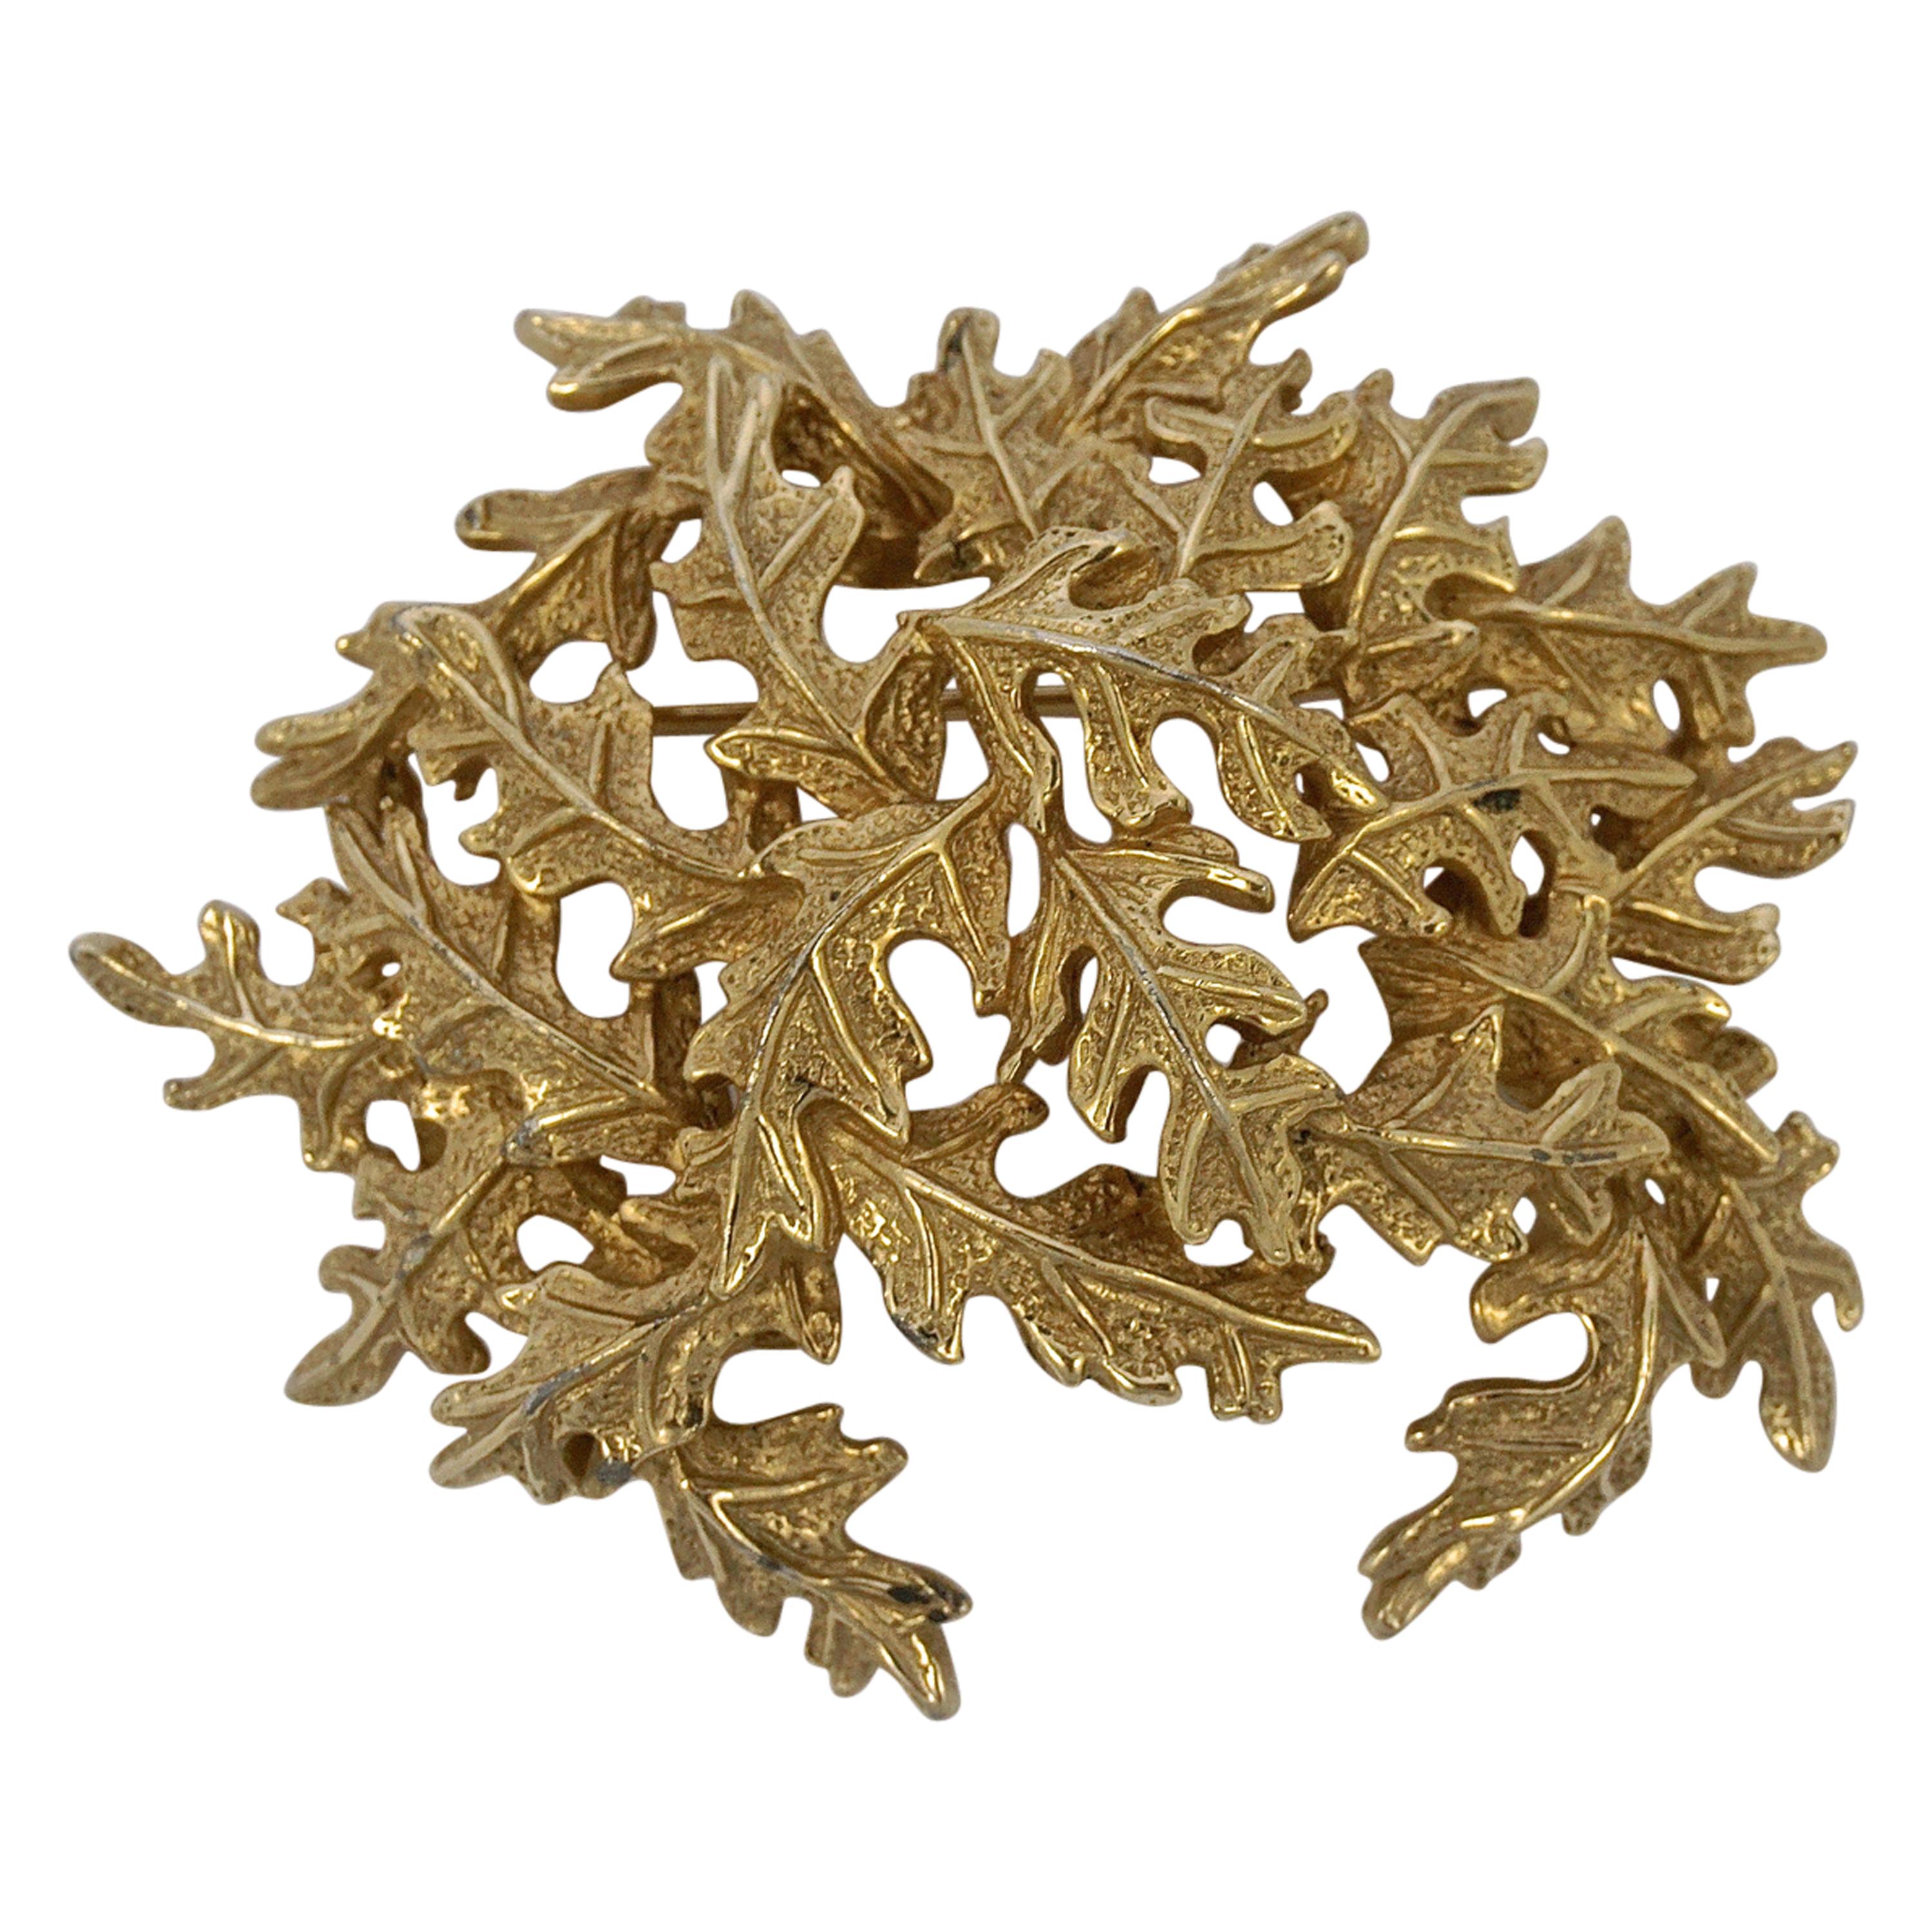 Castlecliff Gold Plated Leaves Statement Brooch